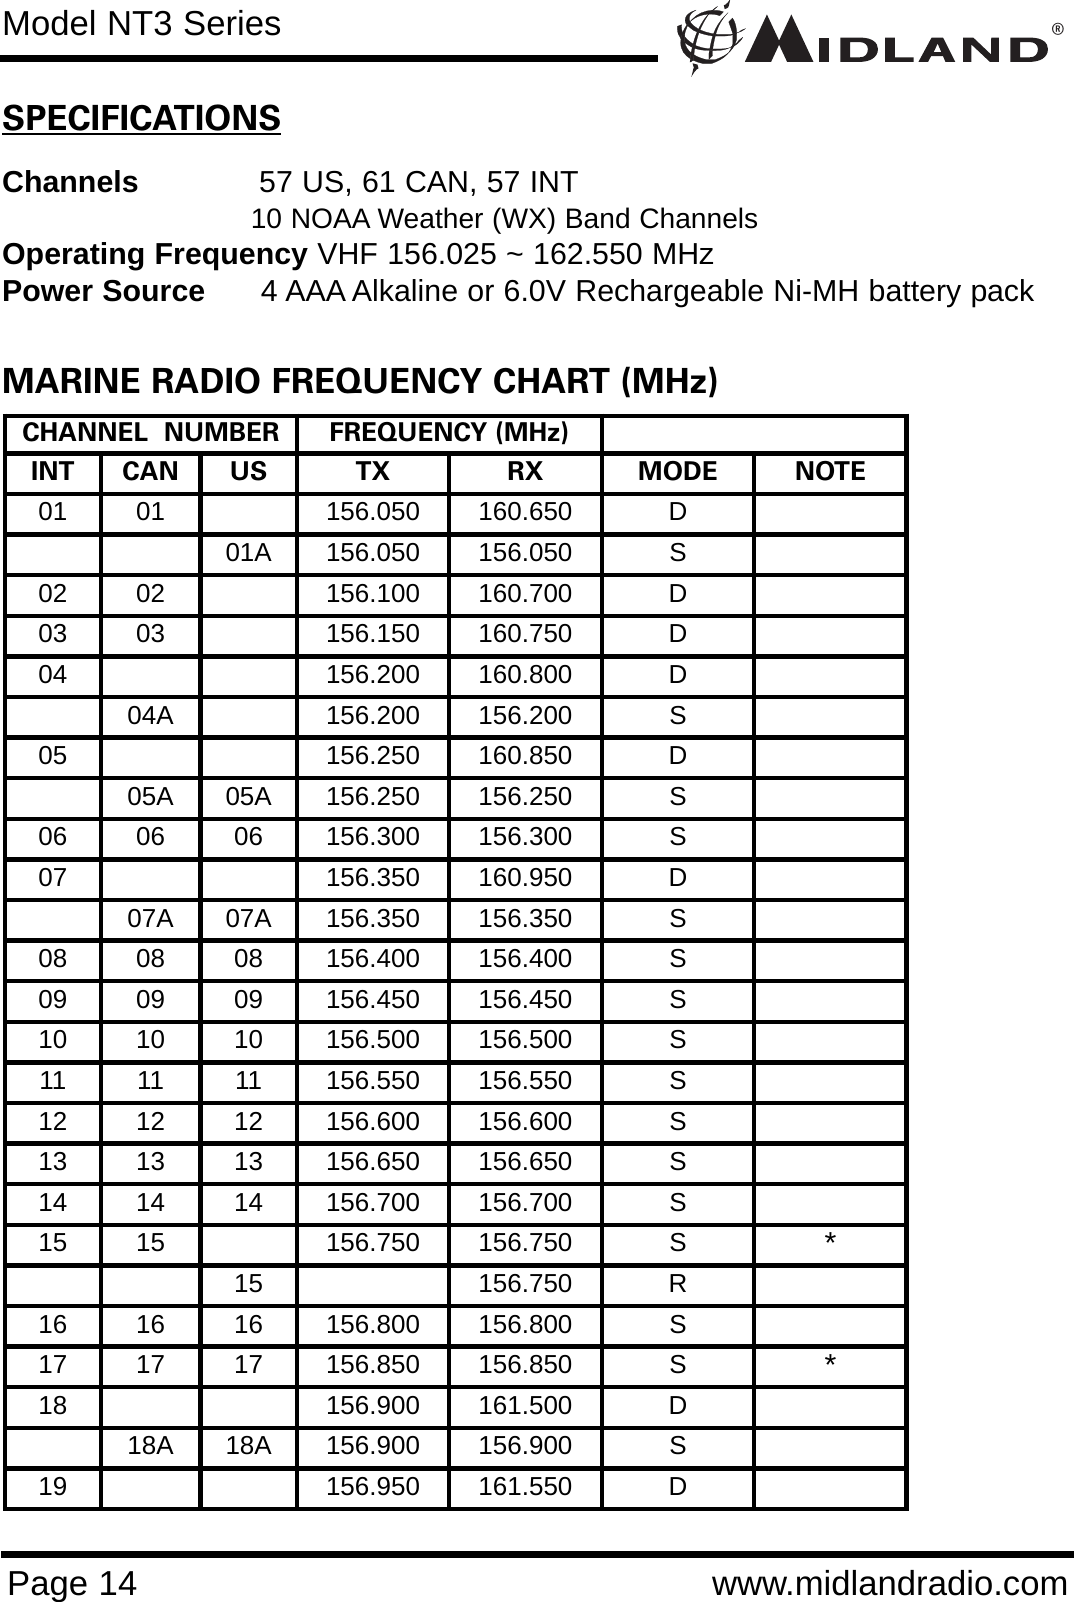 ®Page 14 www.midlandradio.comSPECIFICATIONSChannels 57 US, 61 CAN, 57 INT10 NOAA Weather (WX) Band Channels Operating Frequency VHF 156.025 ~ 162.550 MHzPower Source 4 AAA Alkaline or 6.0V Rechargeable Ni-MH battery packMARINE RADIO FREQUENCY CHART (MHz)Model NT3 SeriesCHANNEL  NUMBER FREQUENCY (MHz)INT CAN US TX RX MODE NOTE01 01 156.050 160.650 D01A 156.050 156.050 S02 02 156.100 160.700 D03 03 156.150 160.750 D04 156.200 160.800  D04A 156.200 156.200 S05 156.250 160.850 D05A 05A 156.250 156.250 S06 06 06 156.300 156.300 S07 156.350 160.950  D07A 07A 156.350 156.350 S08 08 08 156.400 156.400 S09 09 09 156.450 156.450 S10 10 10 156.500 156.500 S11 11 11 156.550 156.550 S12 12 12 156.600 156.600 S13 13 13 156.650 156.650 S14 14 14 156.700 156.700 S15 15 156.750 156.750 S *15 156.750 R16 16 16 156.800  156.800  S17 17 17 156.850  156.850  S *18 156.900 161.500 D18A 18A 156.900 156.900 S19 156.950  161.550 D